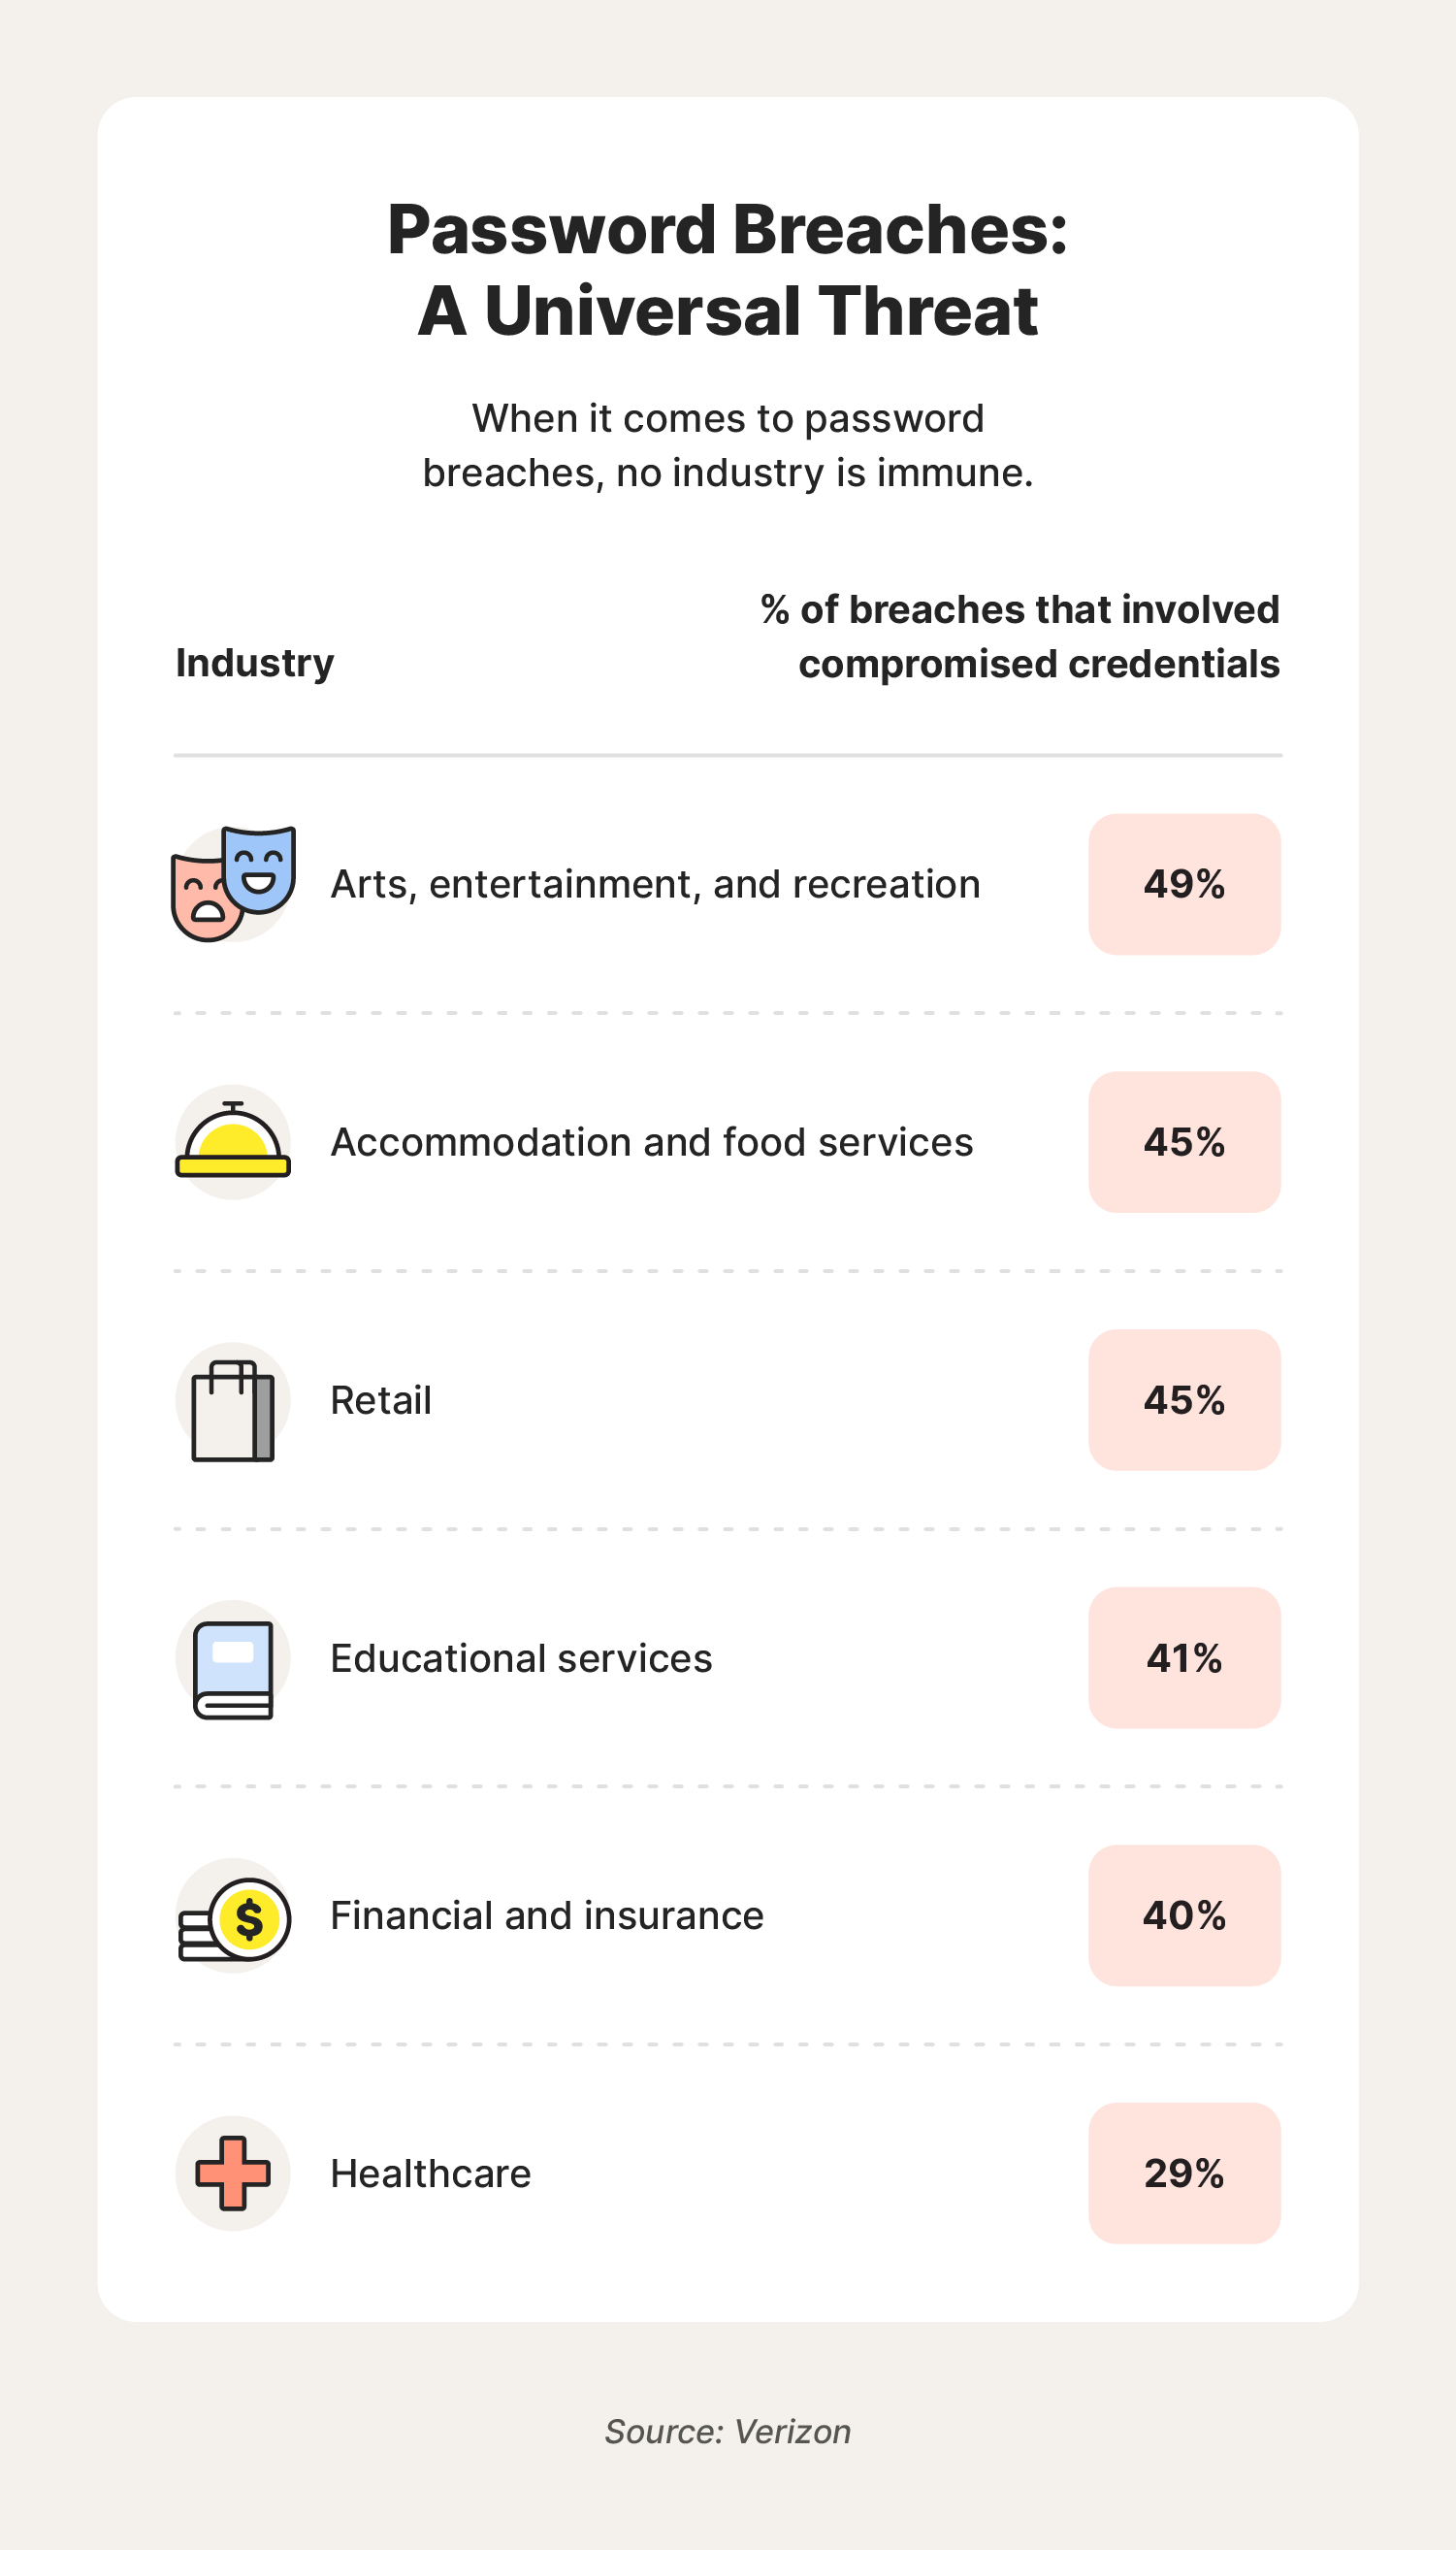 A graphic showcases password statistics related to password breaches in different industries.